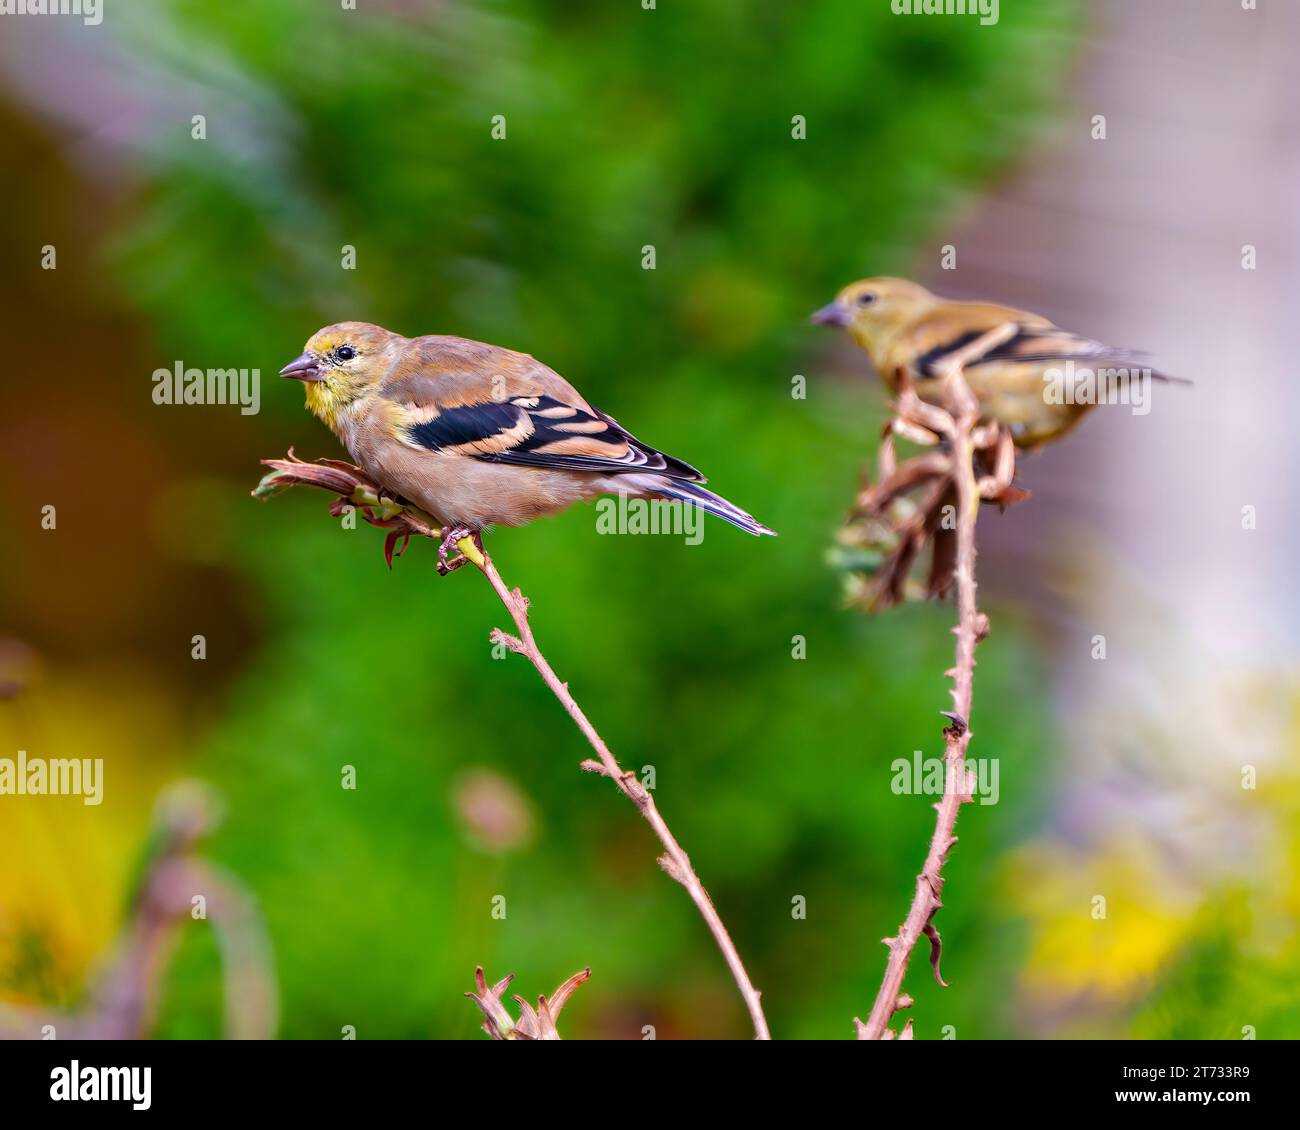 Finch birds close-up side view perched on a branch with colourful background in their environment and habitat surrounding. Two birds. Couple. Stock Photo